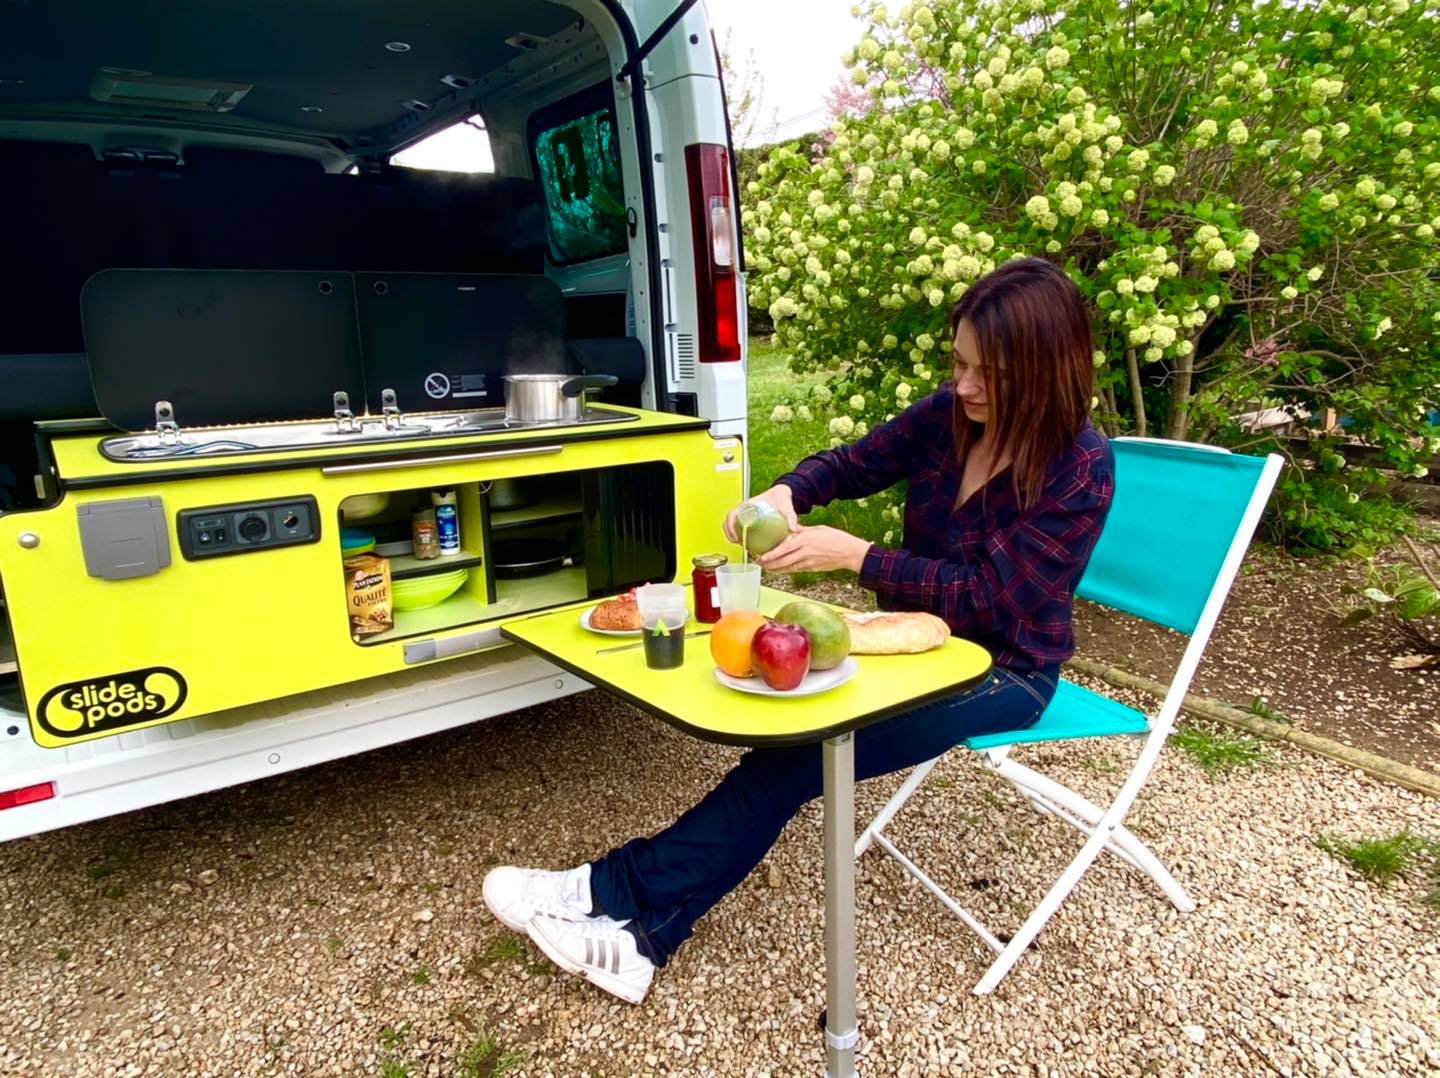 Removable camping kitchen